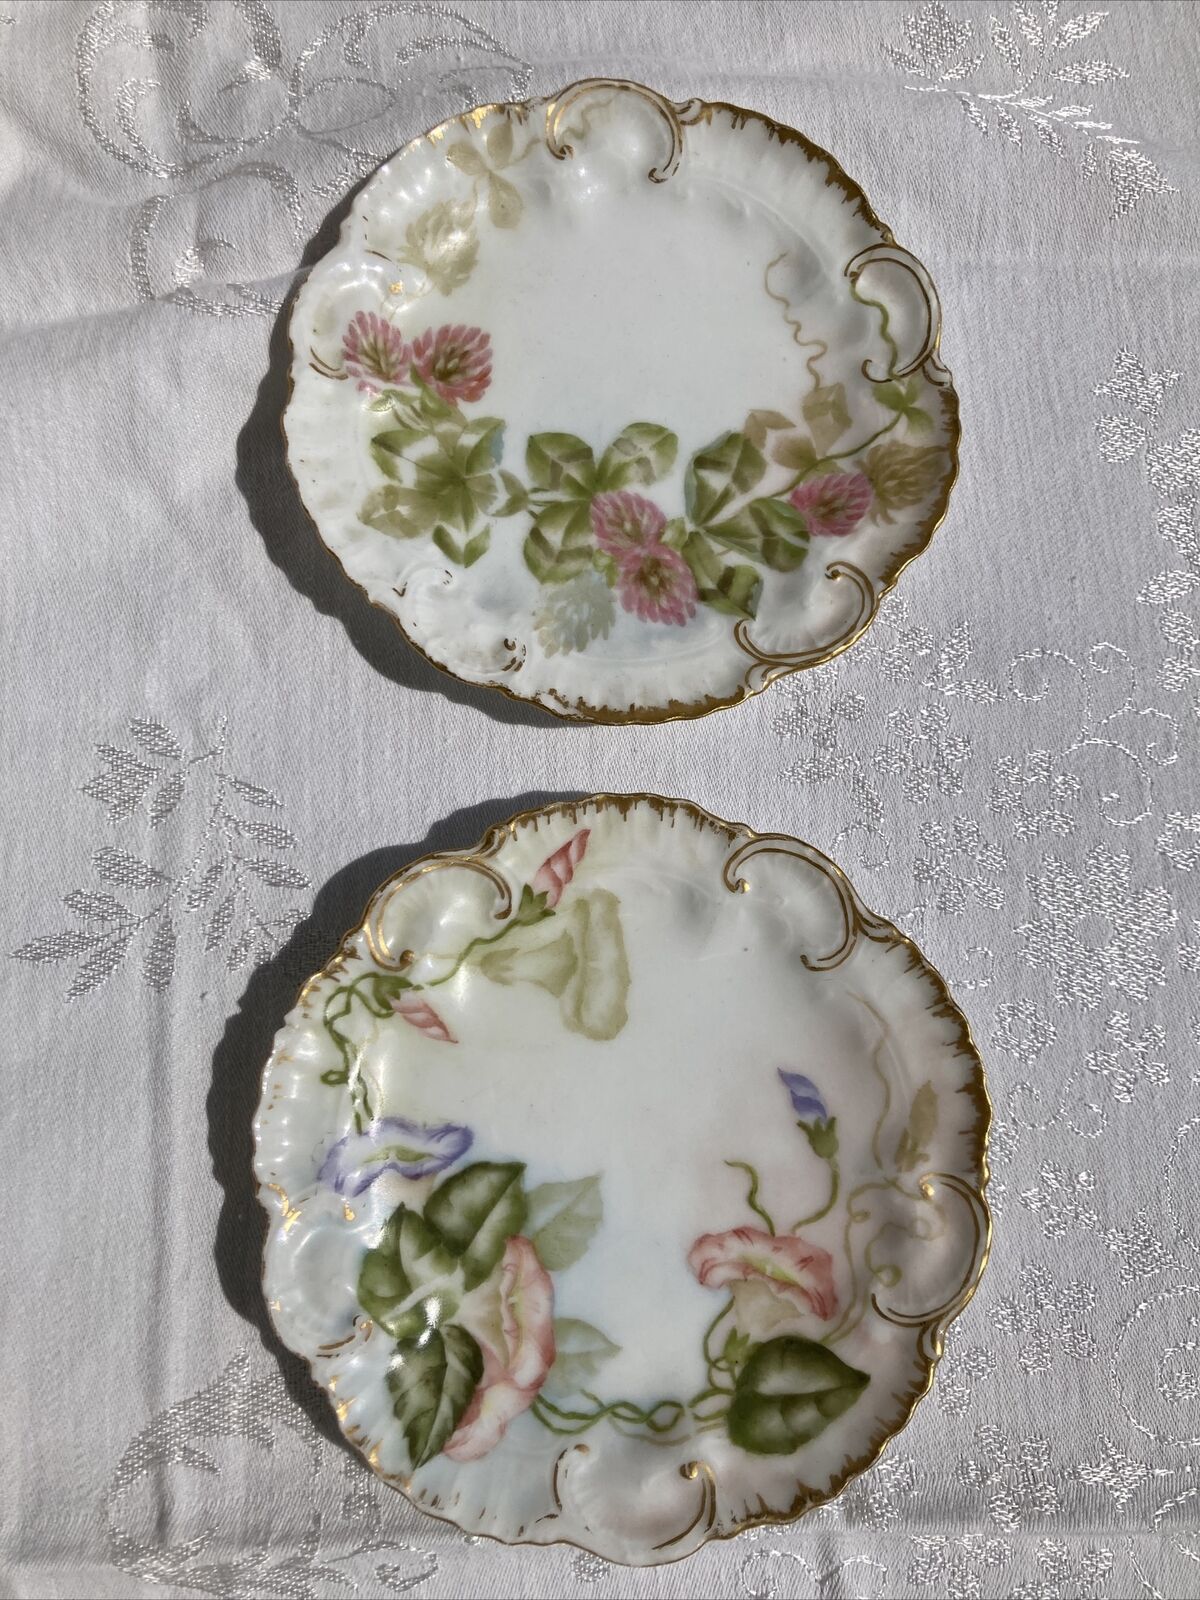 Lot of 2 Hand Painted Limoges Plates Floral Pattern